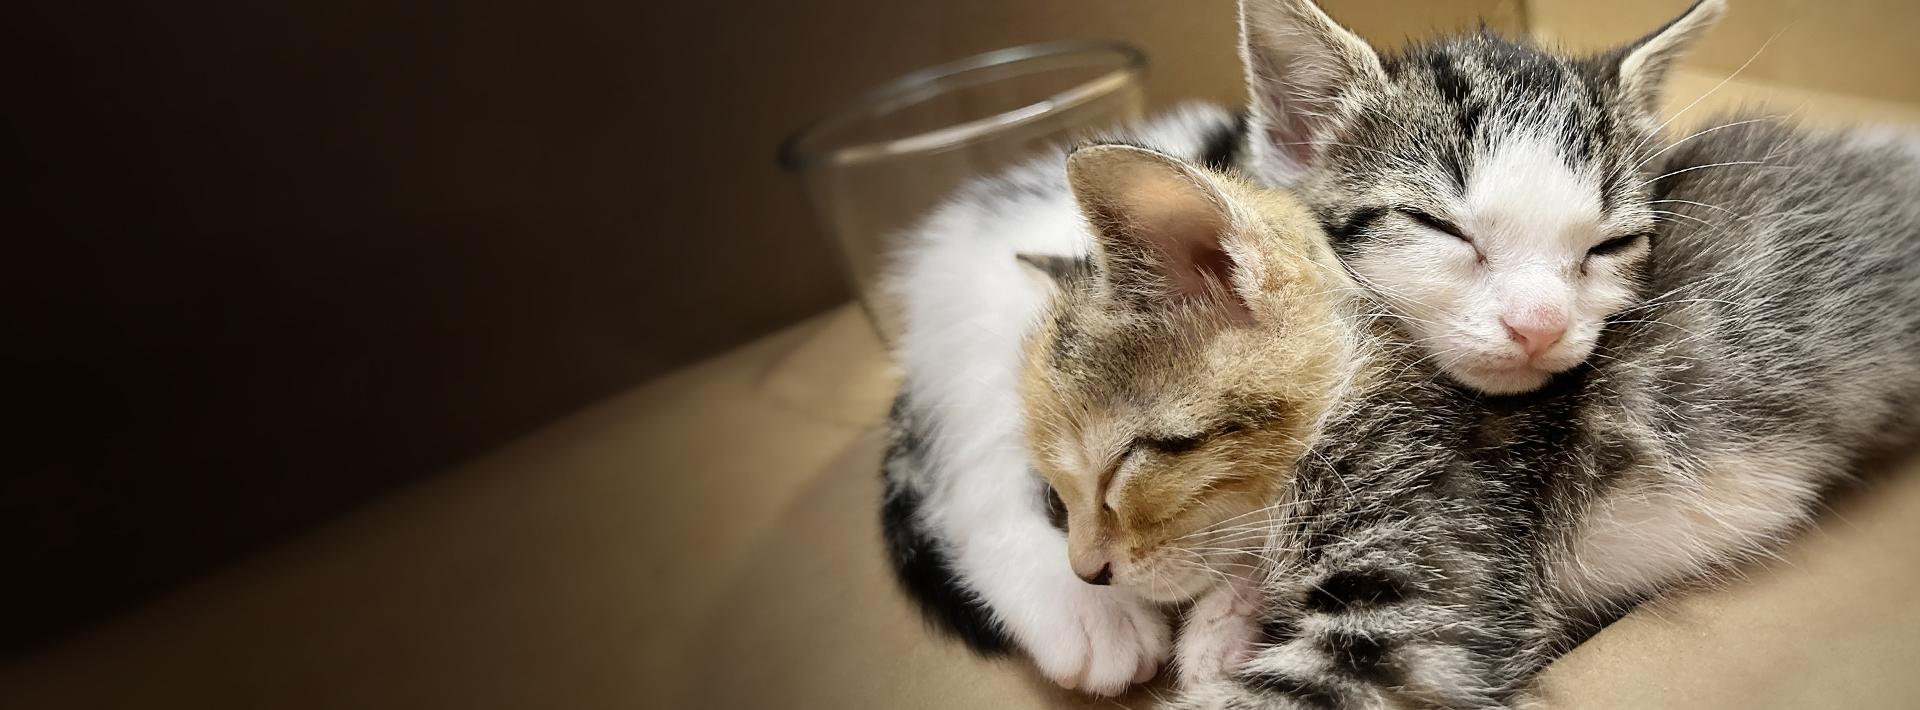 A pair of kittens sleeping snuggled next to each other